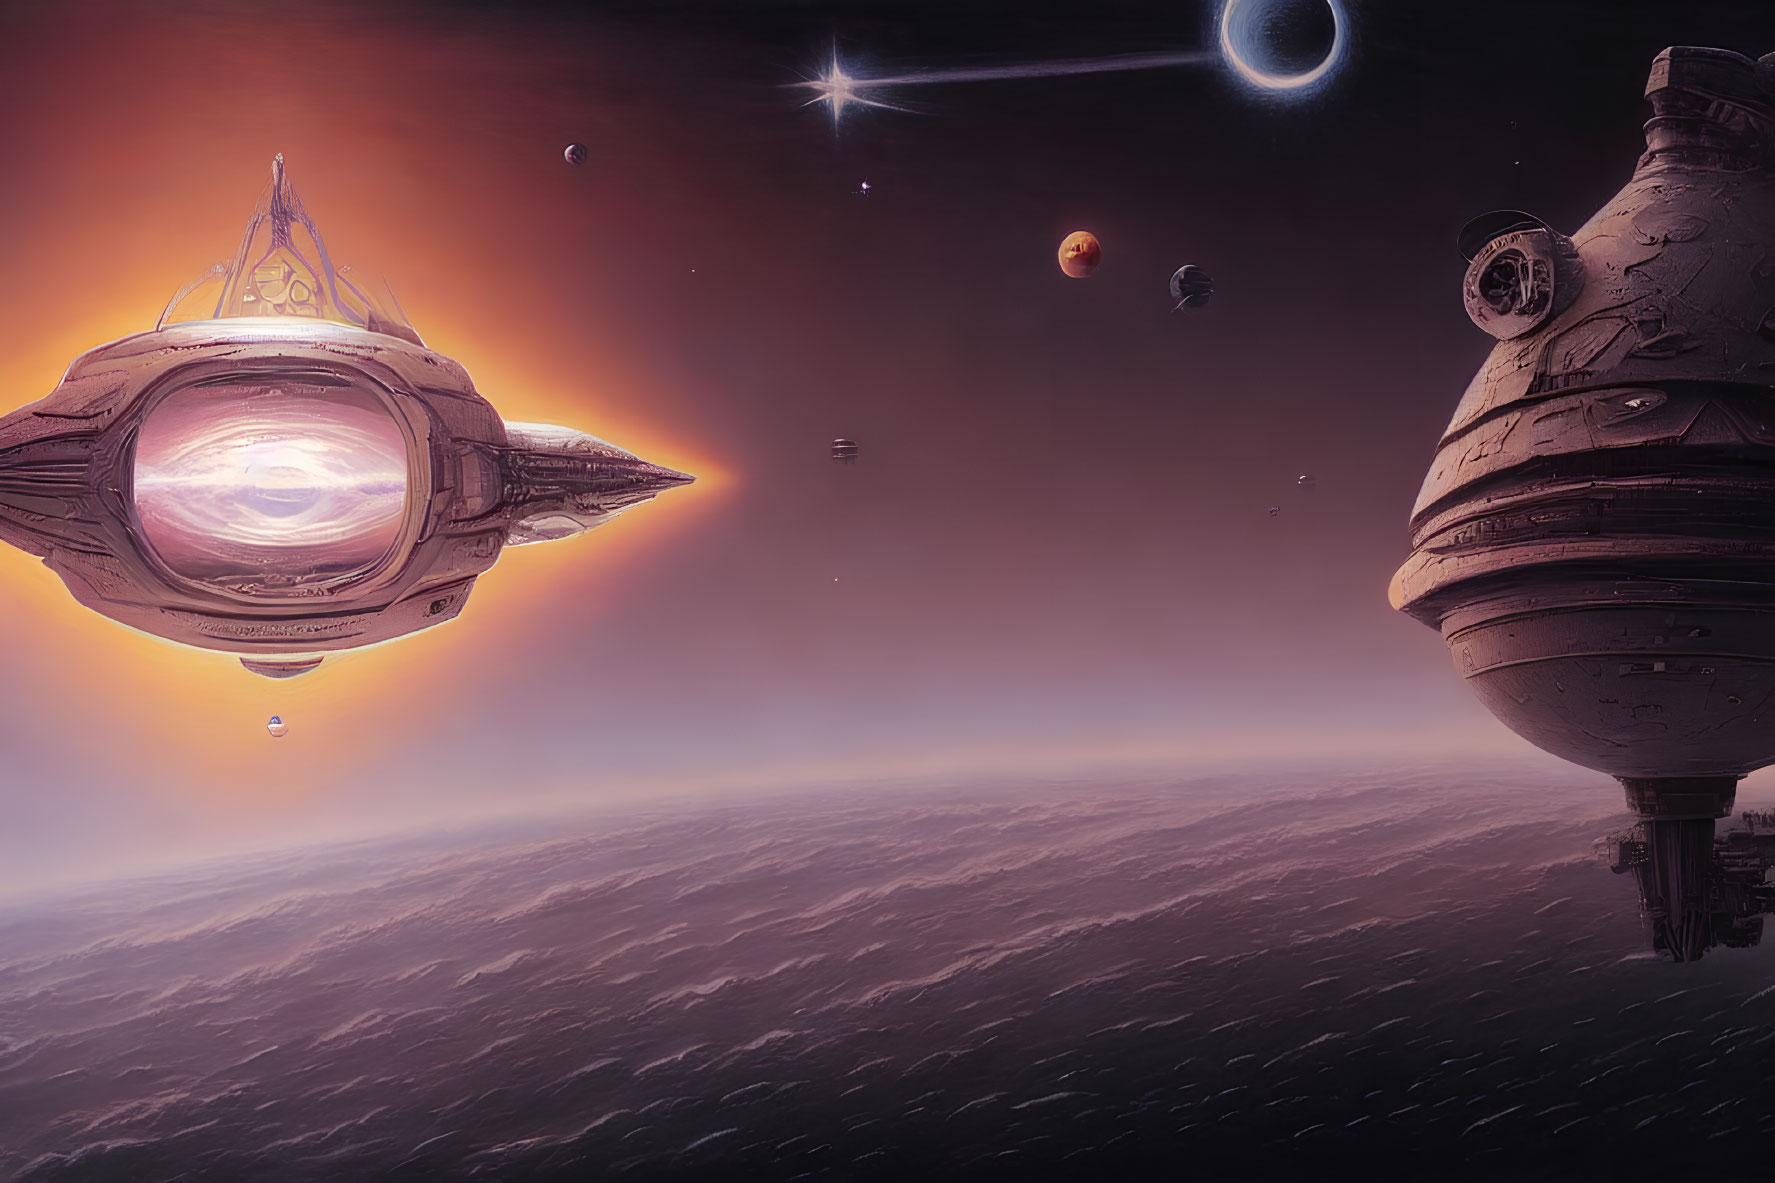 Futuristic spacecraft over gas giant with moons and star in orange interstellar scene